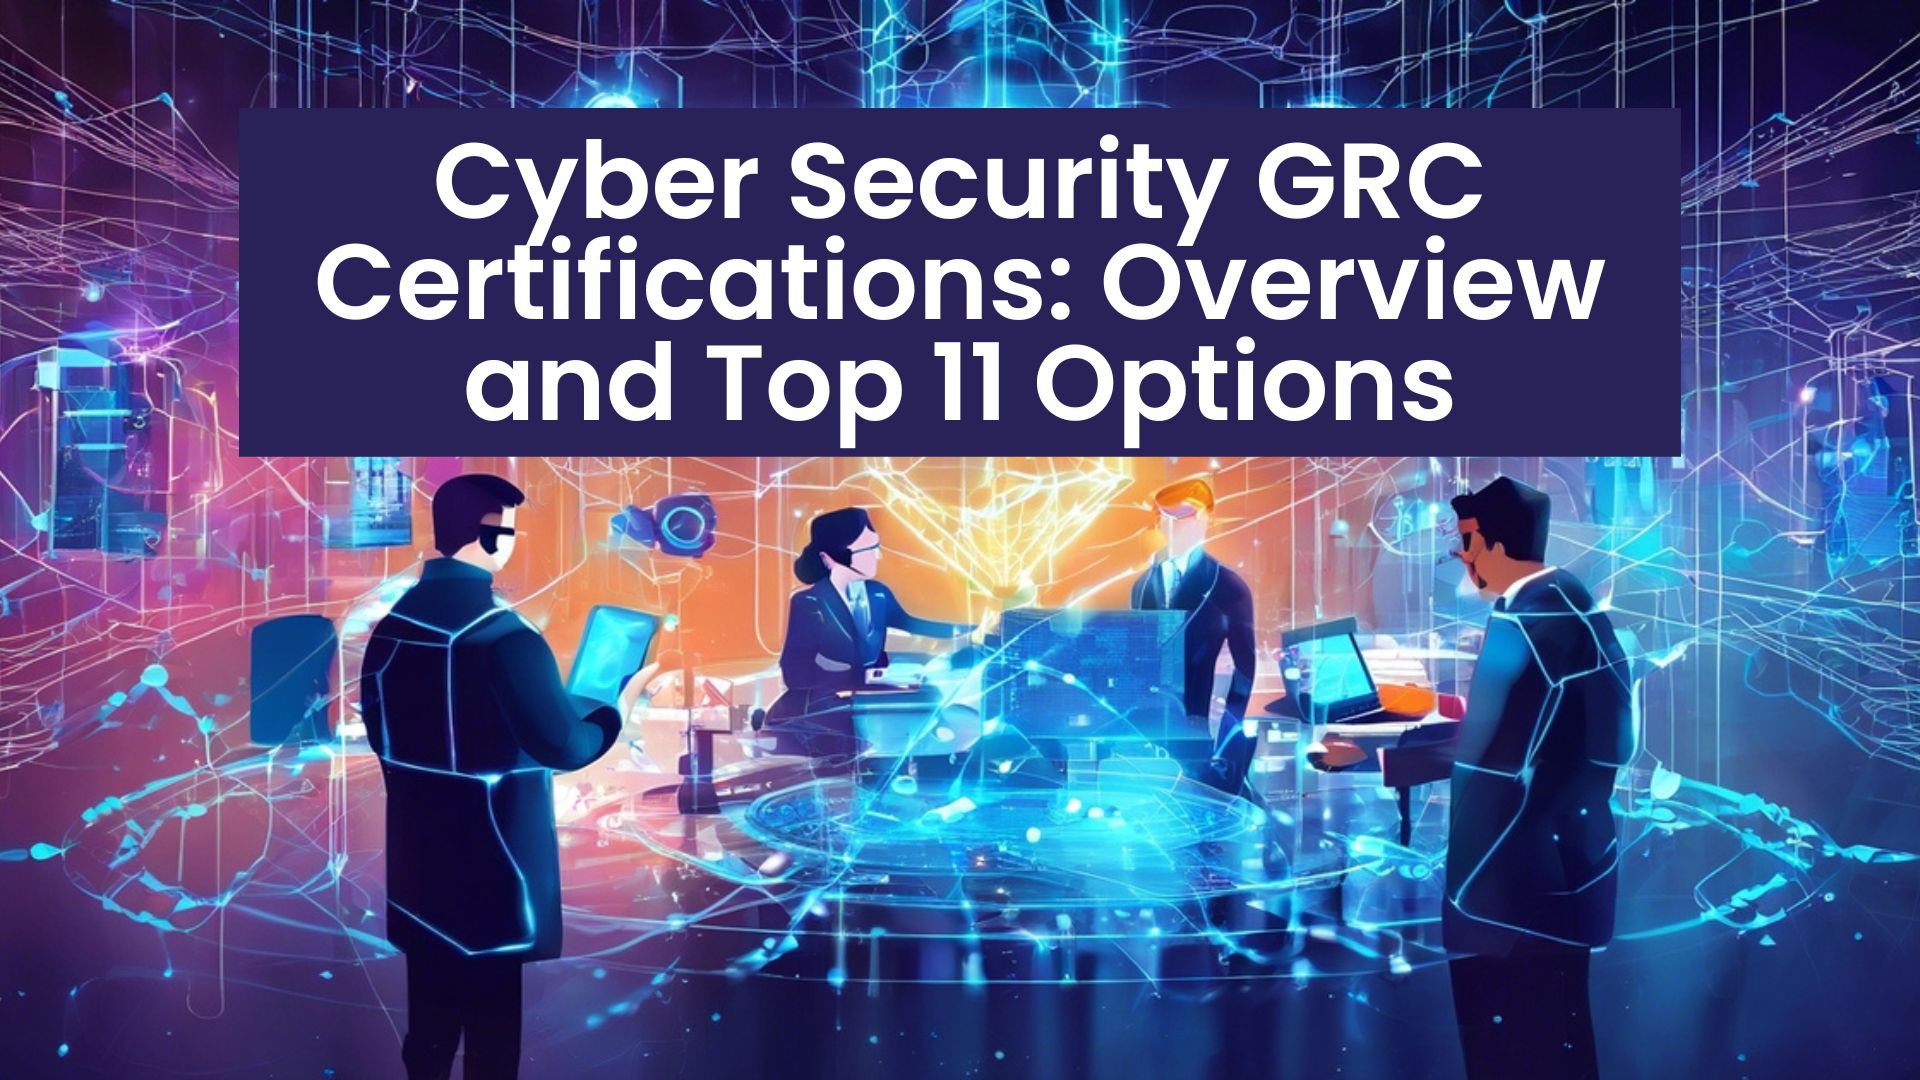 Cyber Security GRC Certifications Overview and Top 11 Options